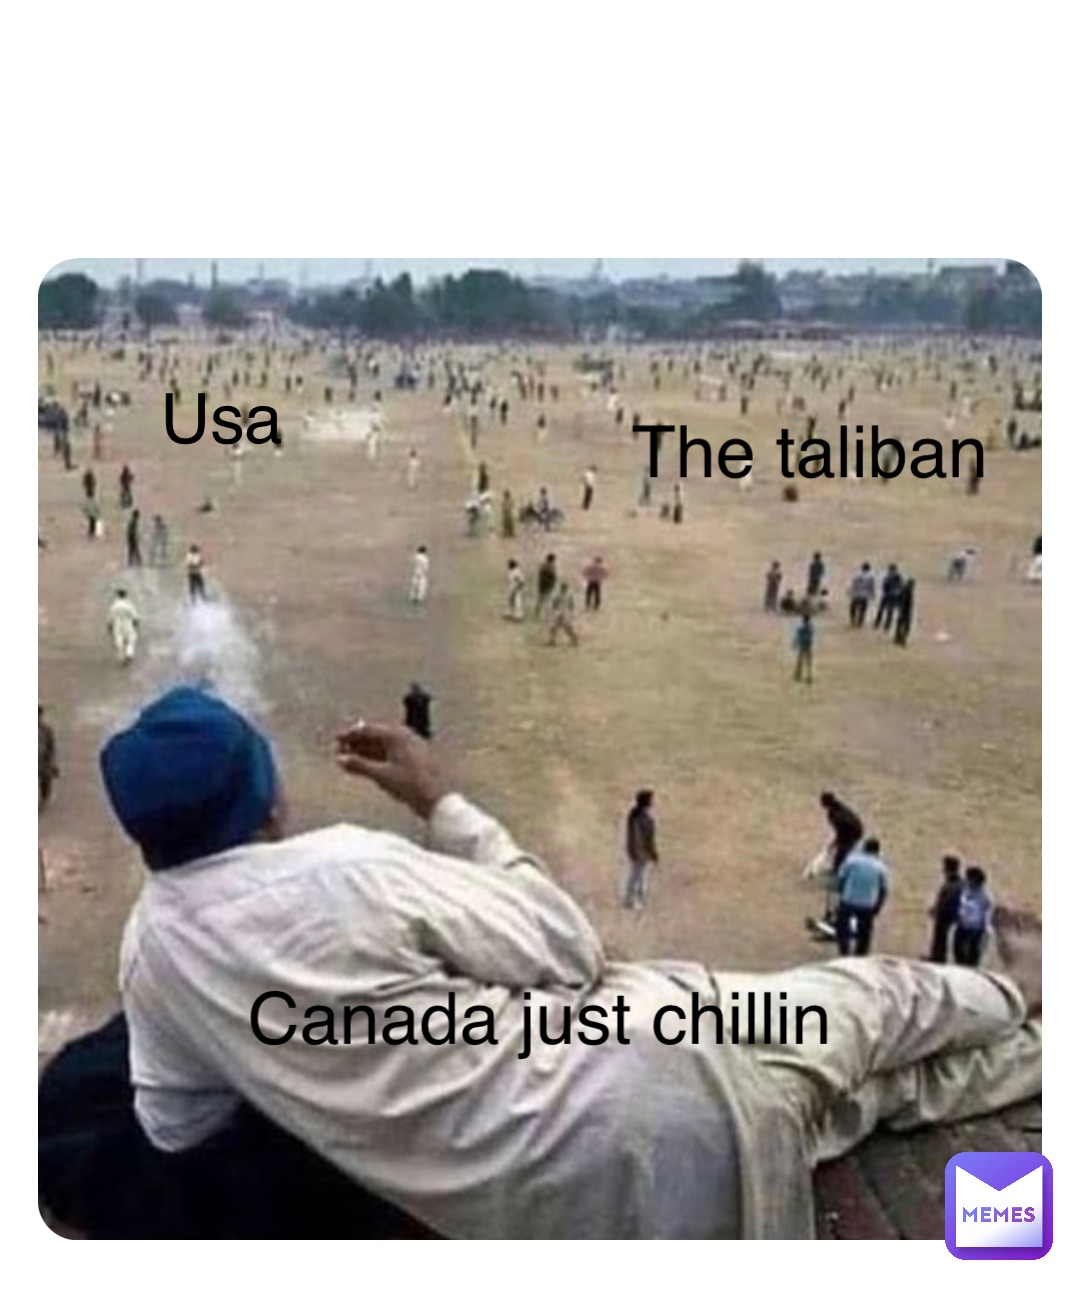 Double tap to edit The taliban Usa Canada just chillin